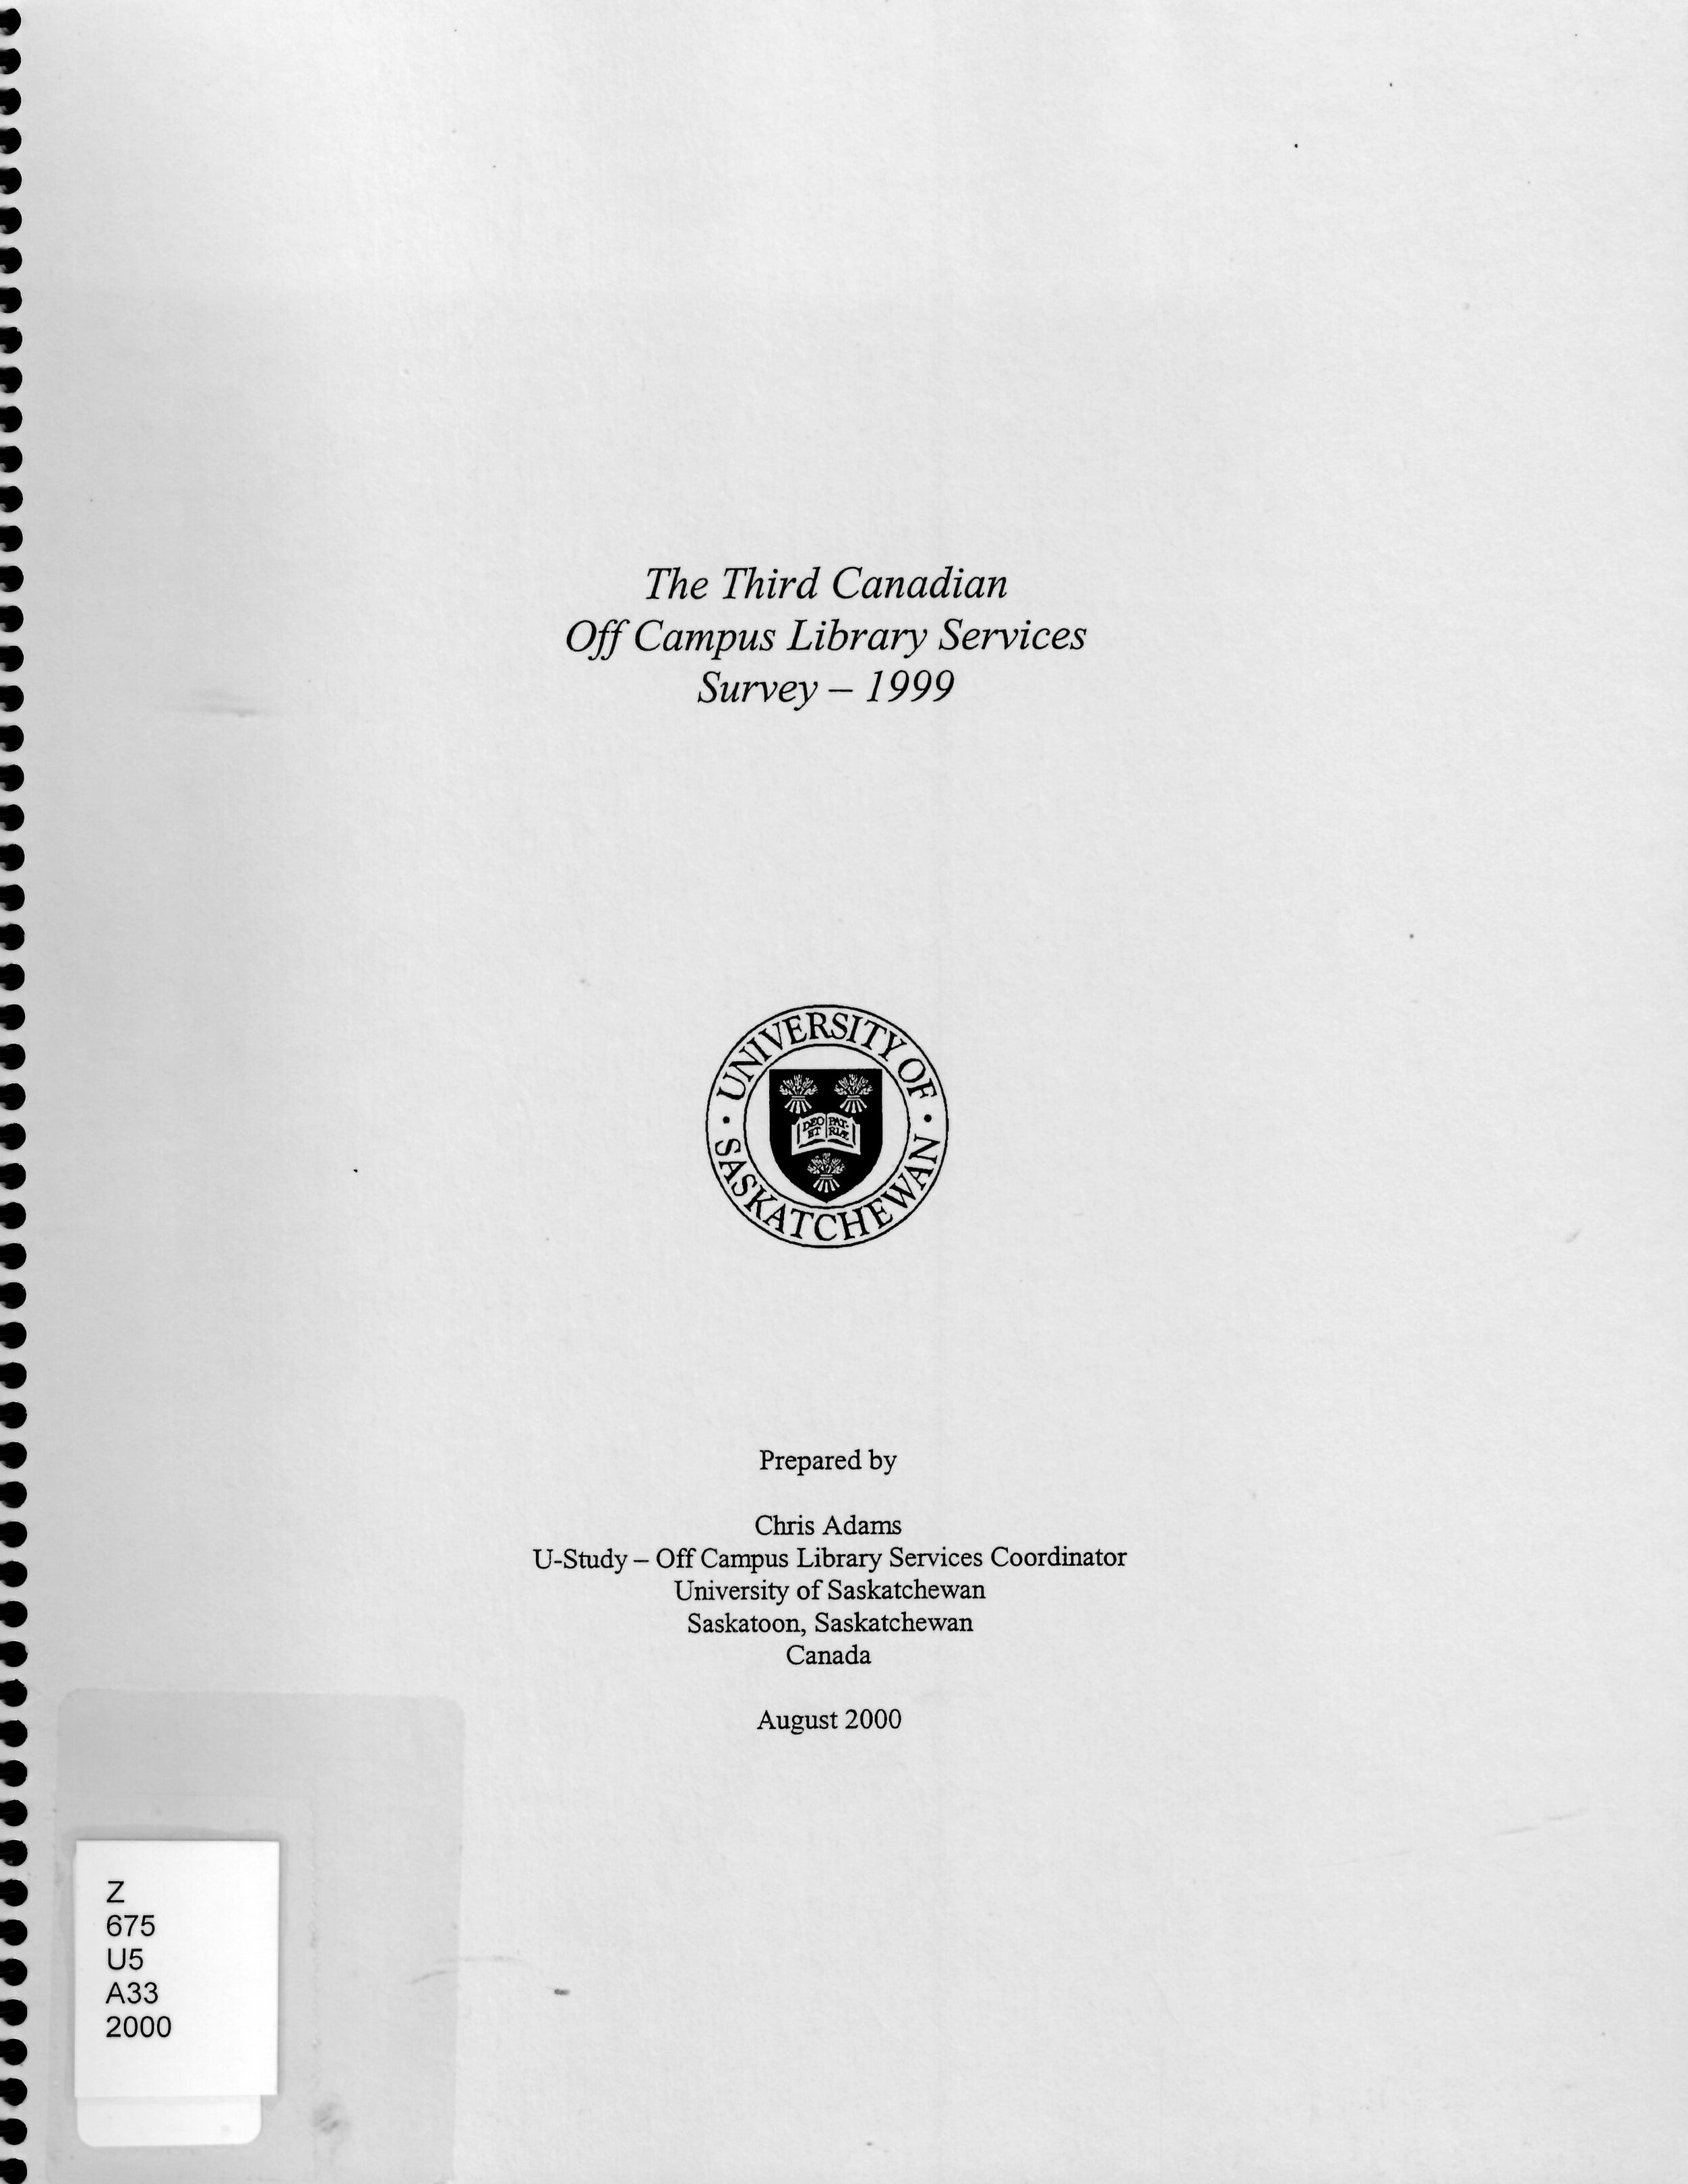 The third Canadian off campus library services survey - 1999